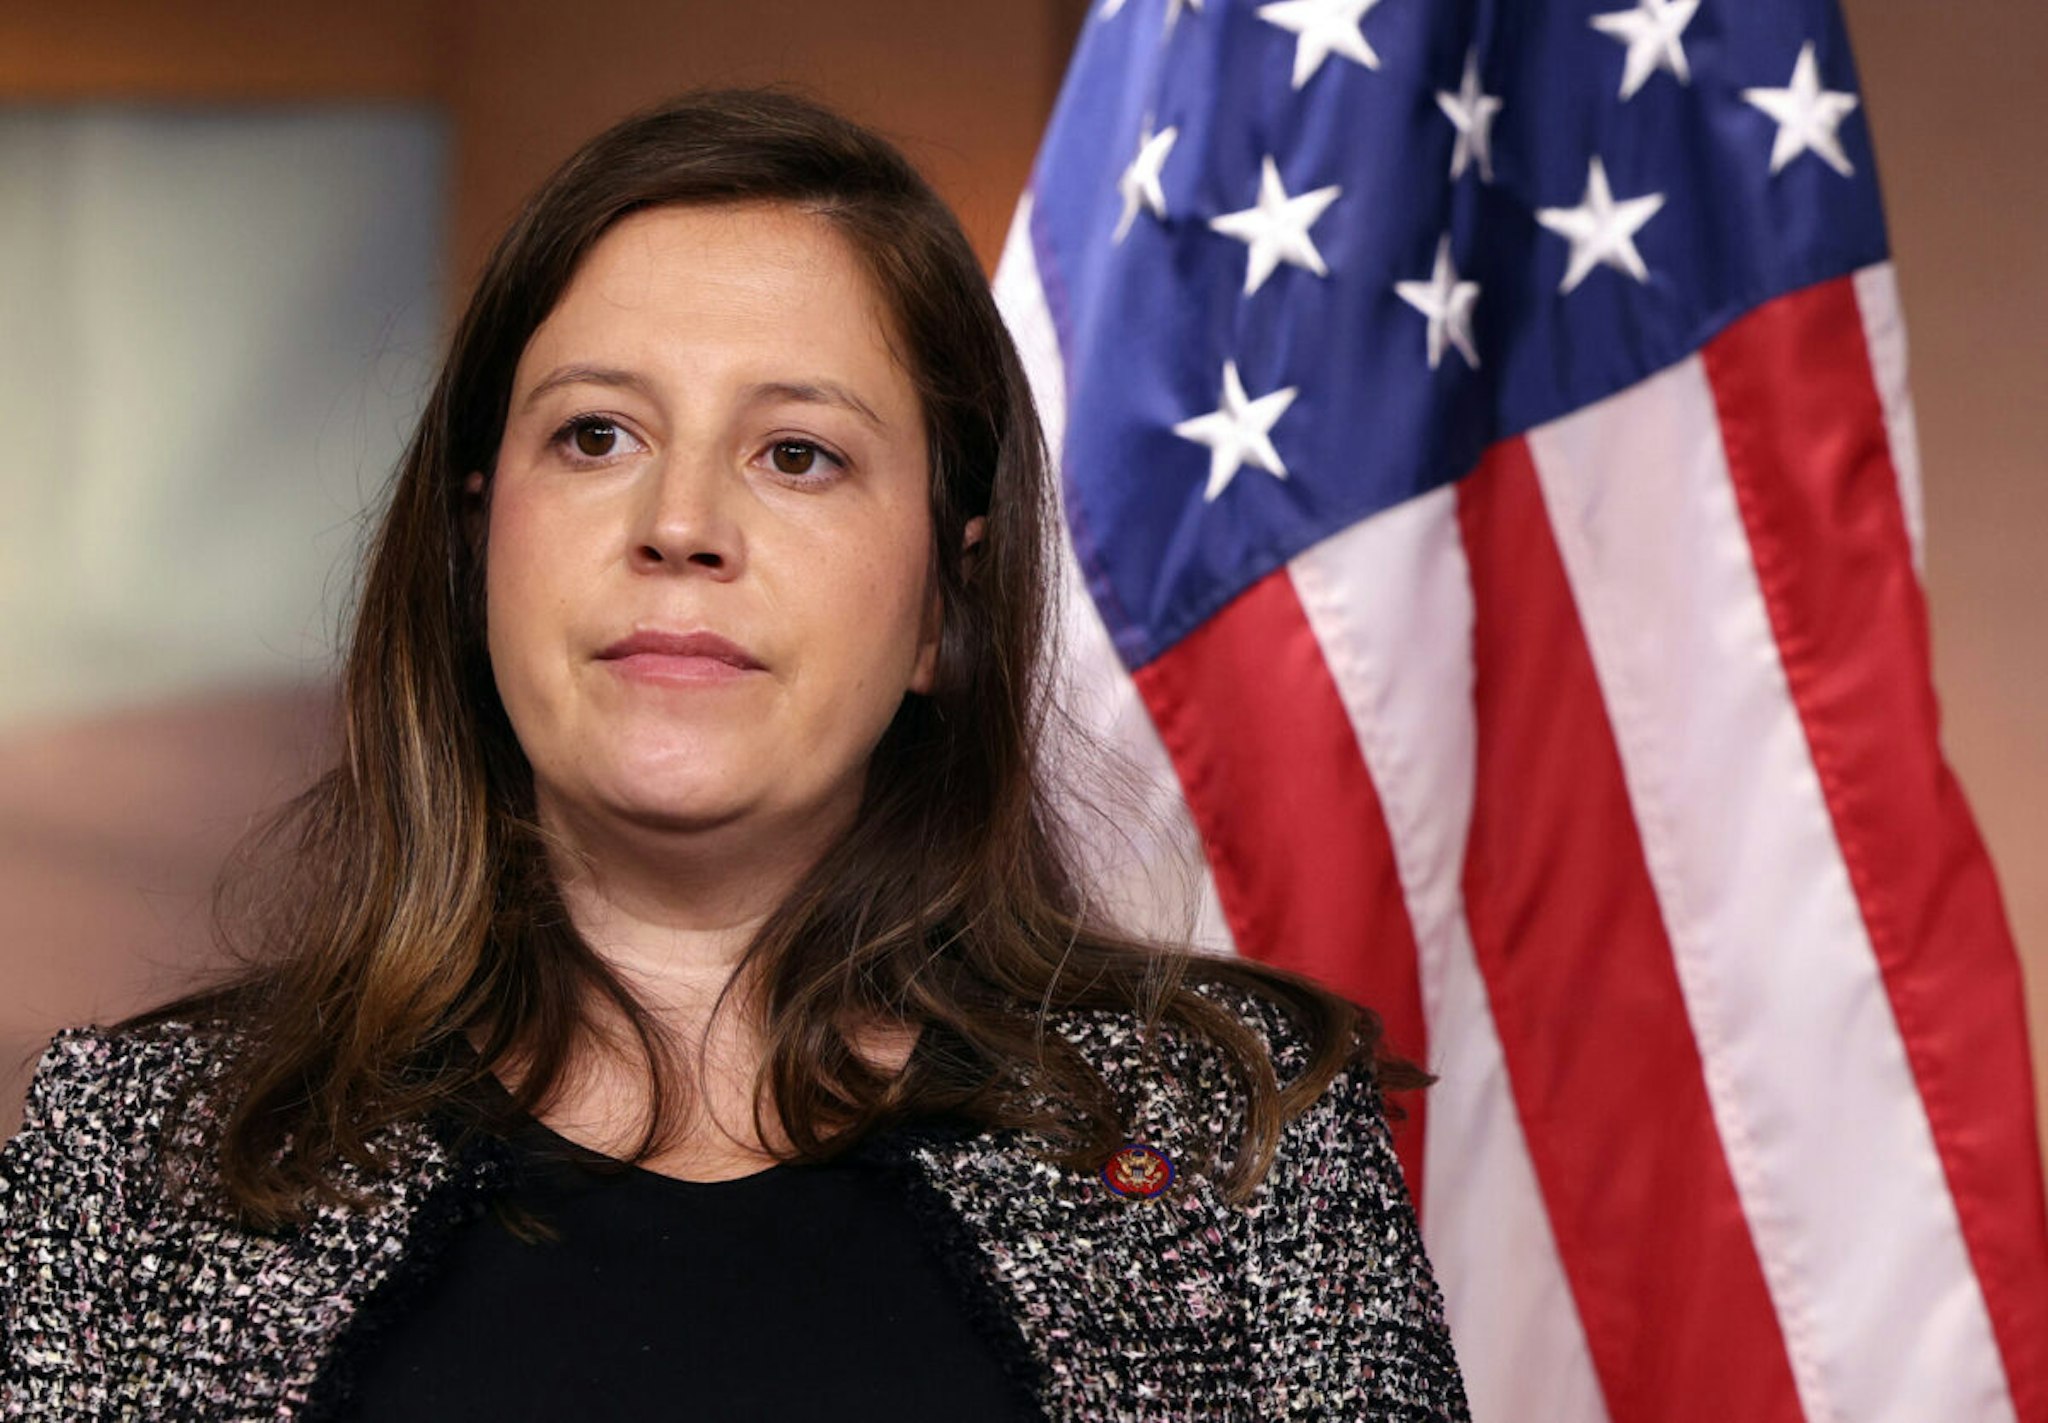 U.S. Rep. Elise Stefanik (R-NY) attends a press briefing following a House Republican conference meeting at the U.S. Capitol on June 29, 2021 in Washington, DC.